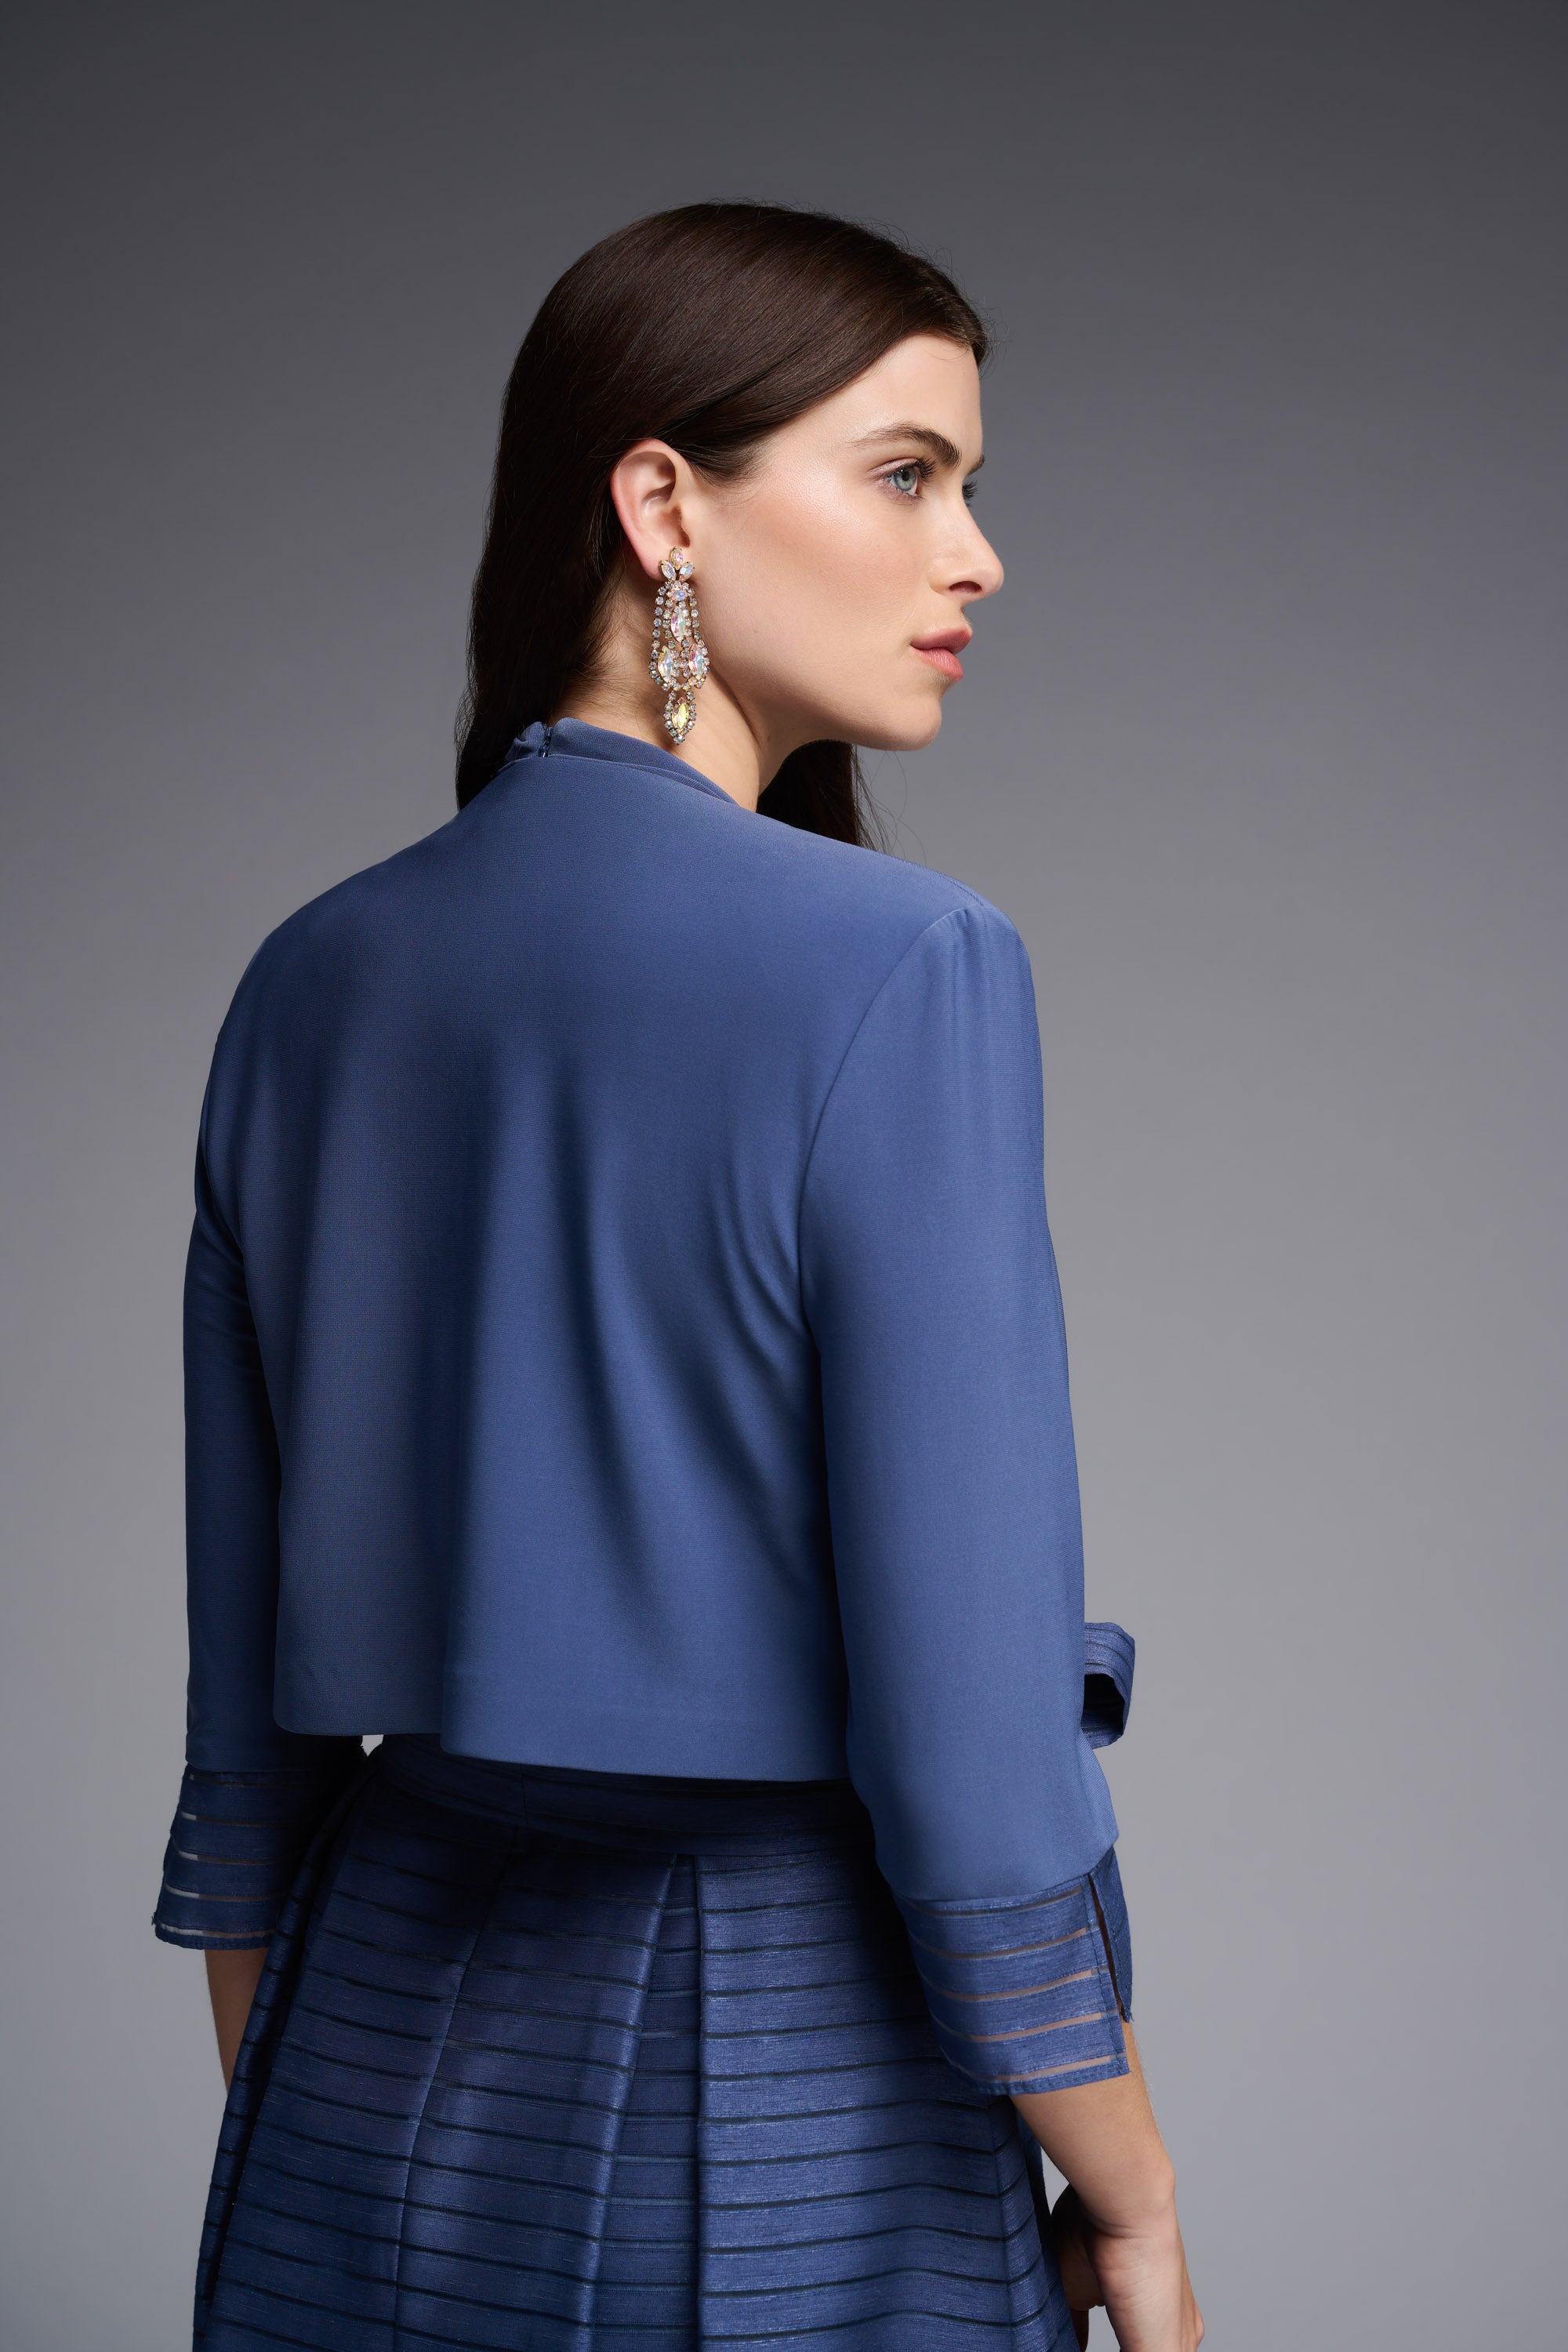 Classic Open Front Bolero In Mineral Blue 231748 - After Hours Boutique